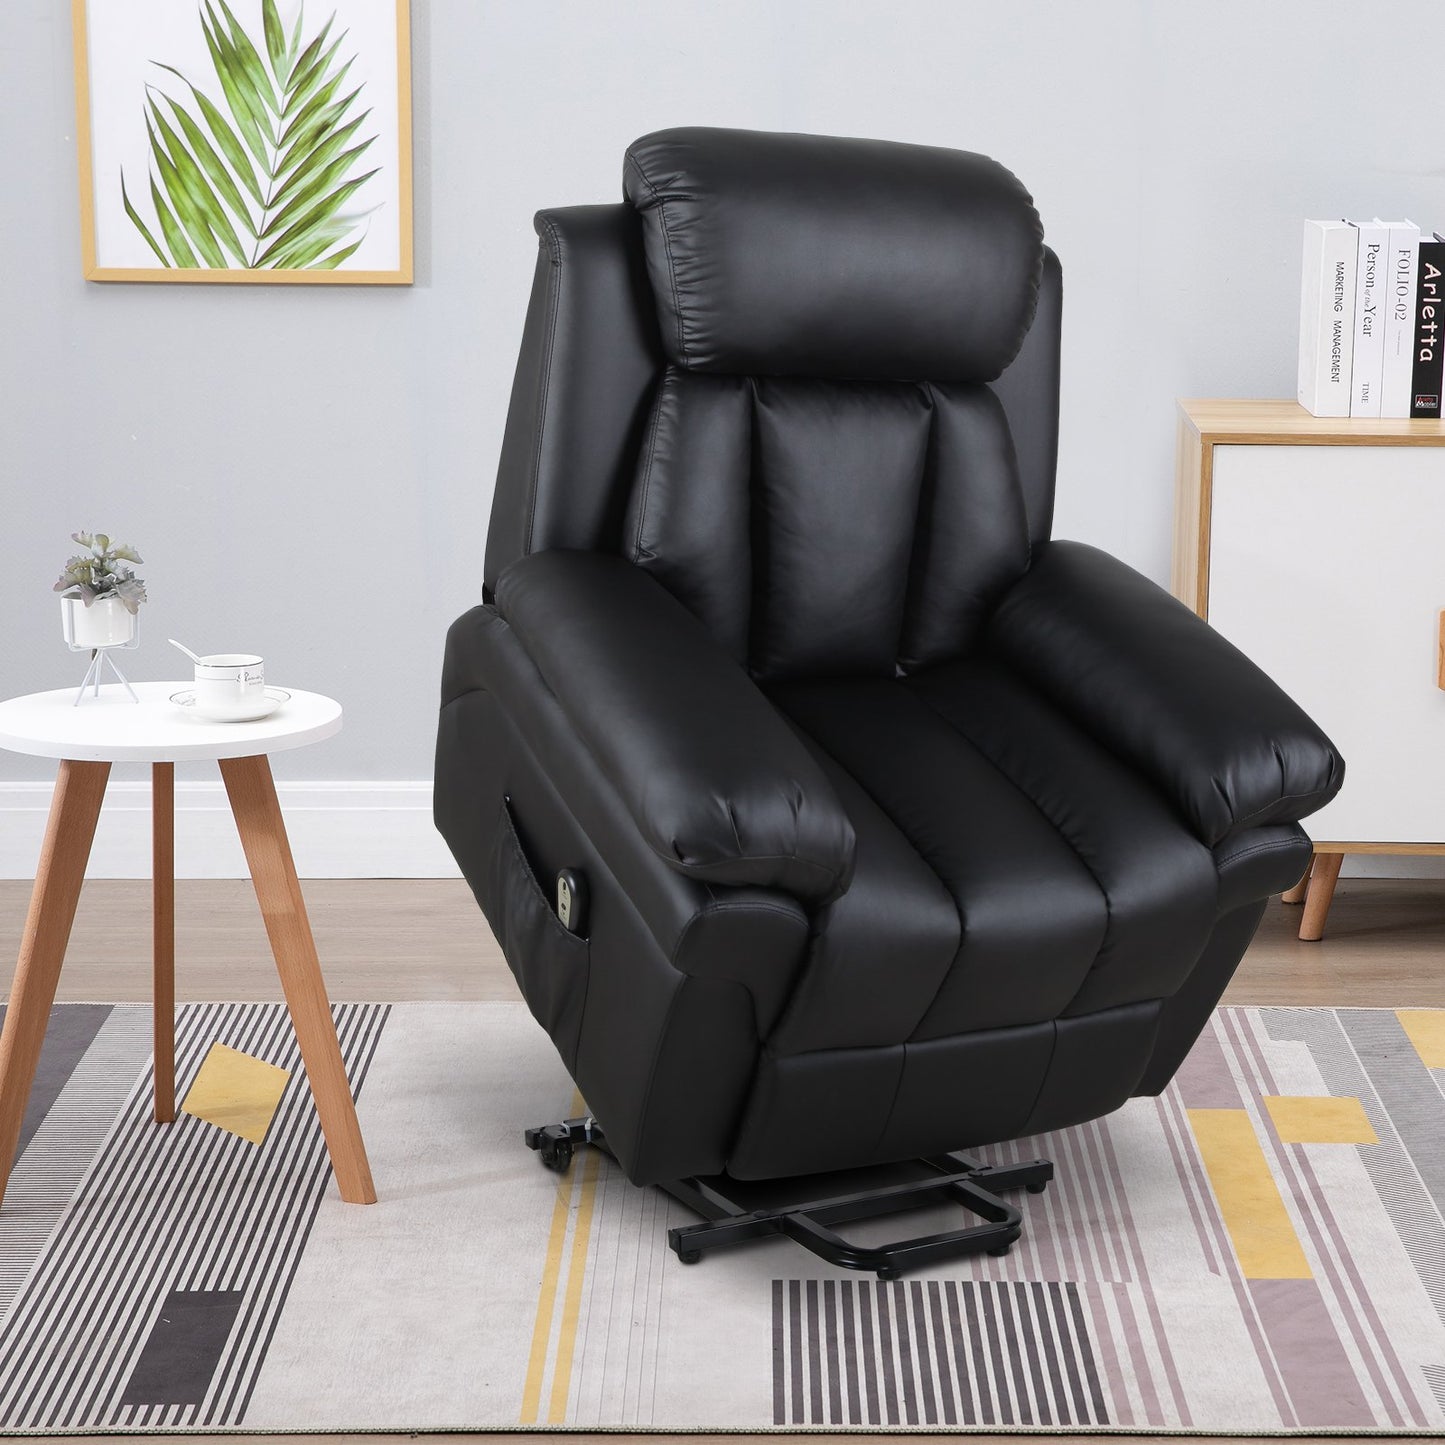 HOMCOM Lift Armchair Electric Power Stand Assist Recliner Chair w/Padding PU Leather Black